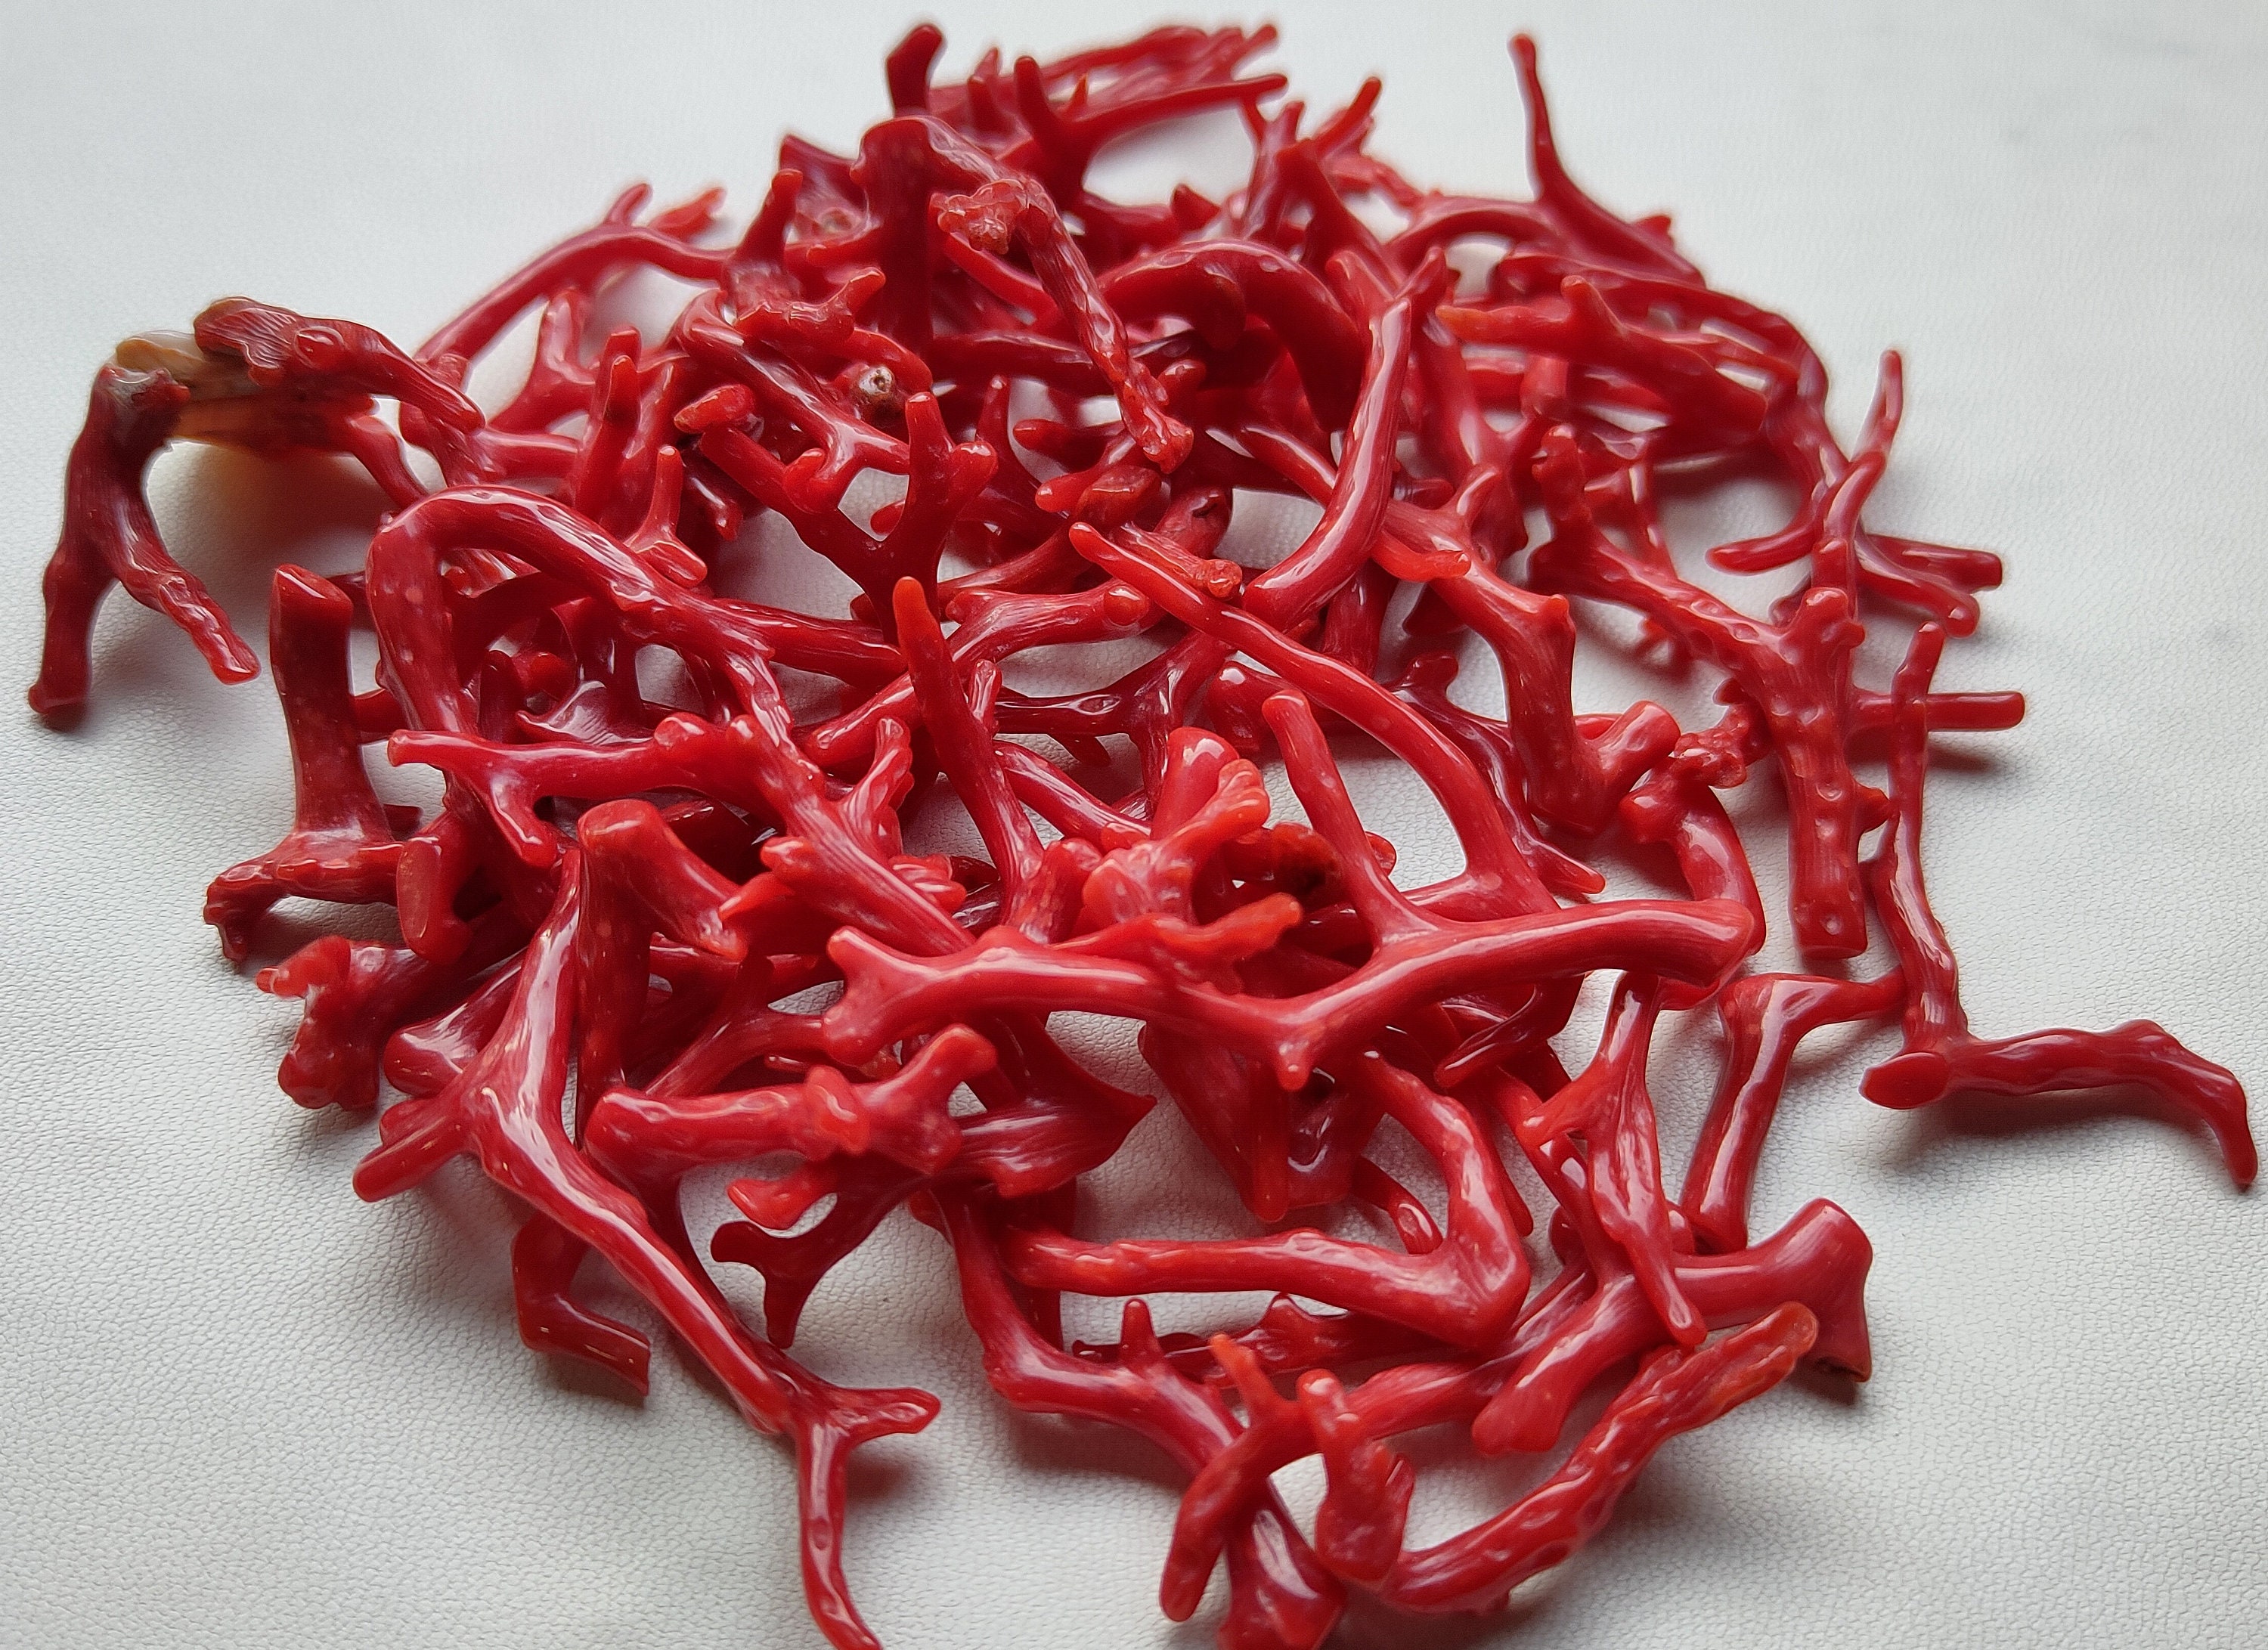 Red Coral 100% Italian Red Coral Gemstone Loose Branch - Etsy